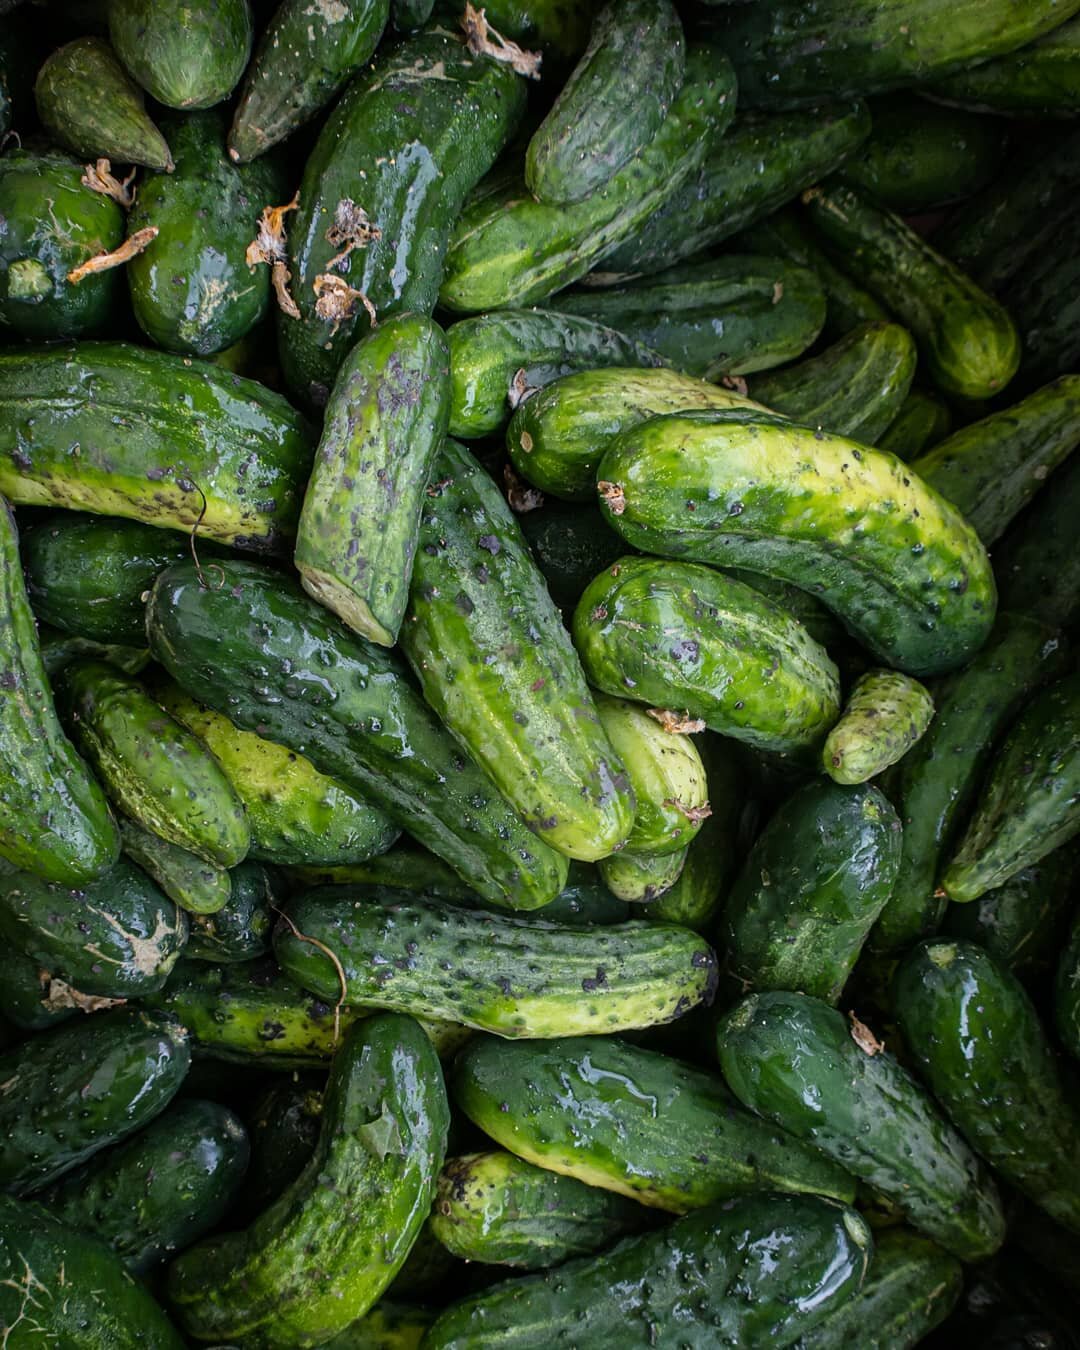 It was a hot summer when I was able to snag this shot at the farmers market of a fresh box of cucumbers. For some reason I'm eating way more cucumbers these days. Is there a veggie you've been eating more of lately?⁣
⁣
🥒🥒🥒⁣
⁣
#flatlaynation #flatl